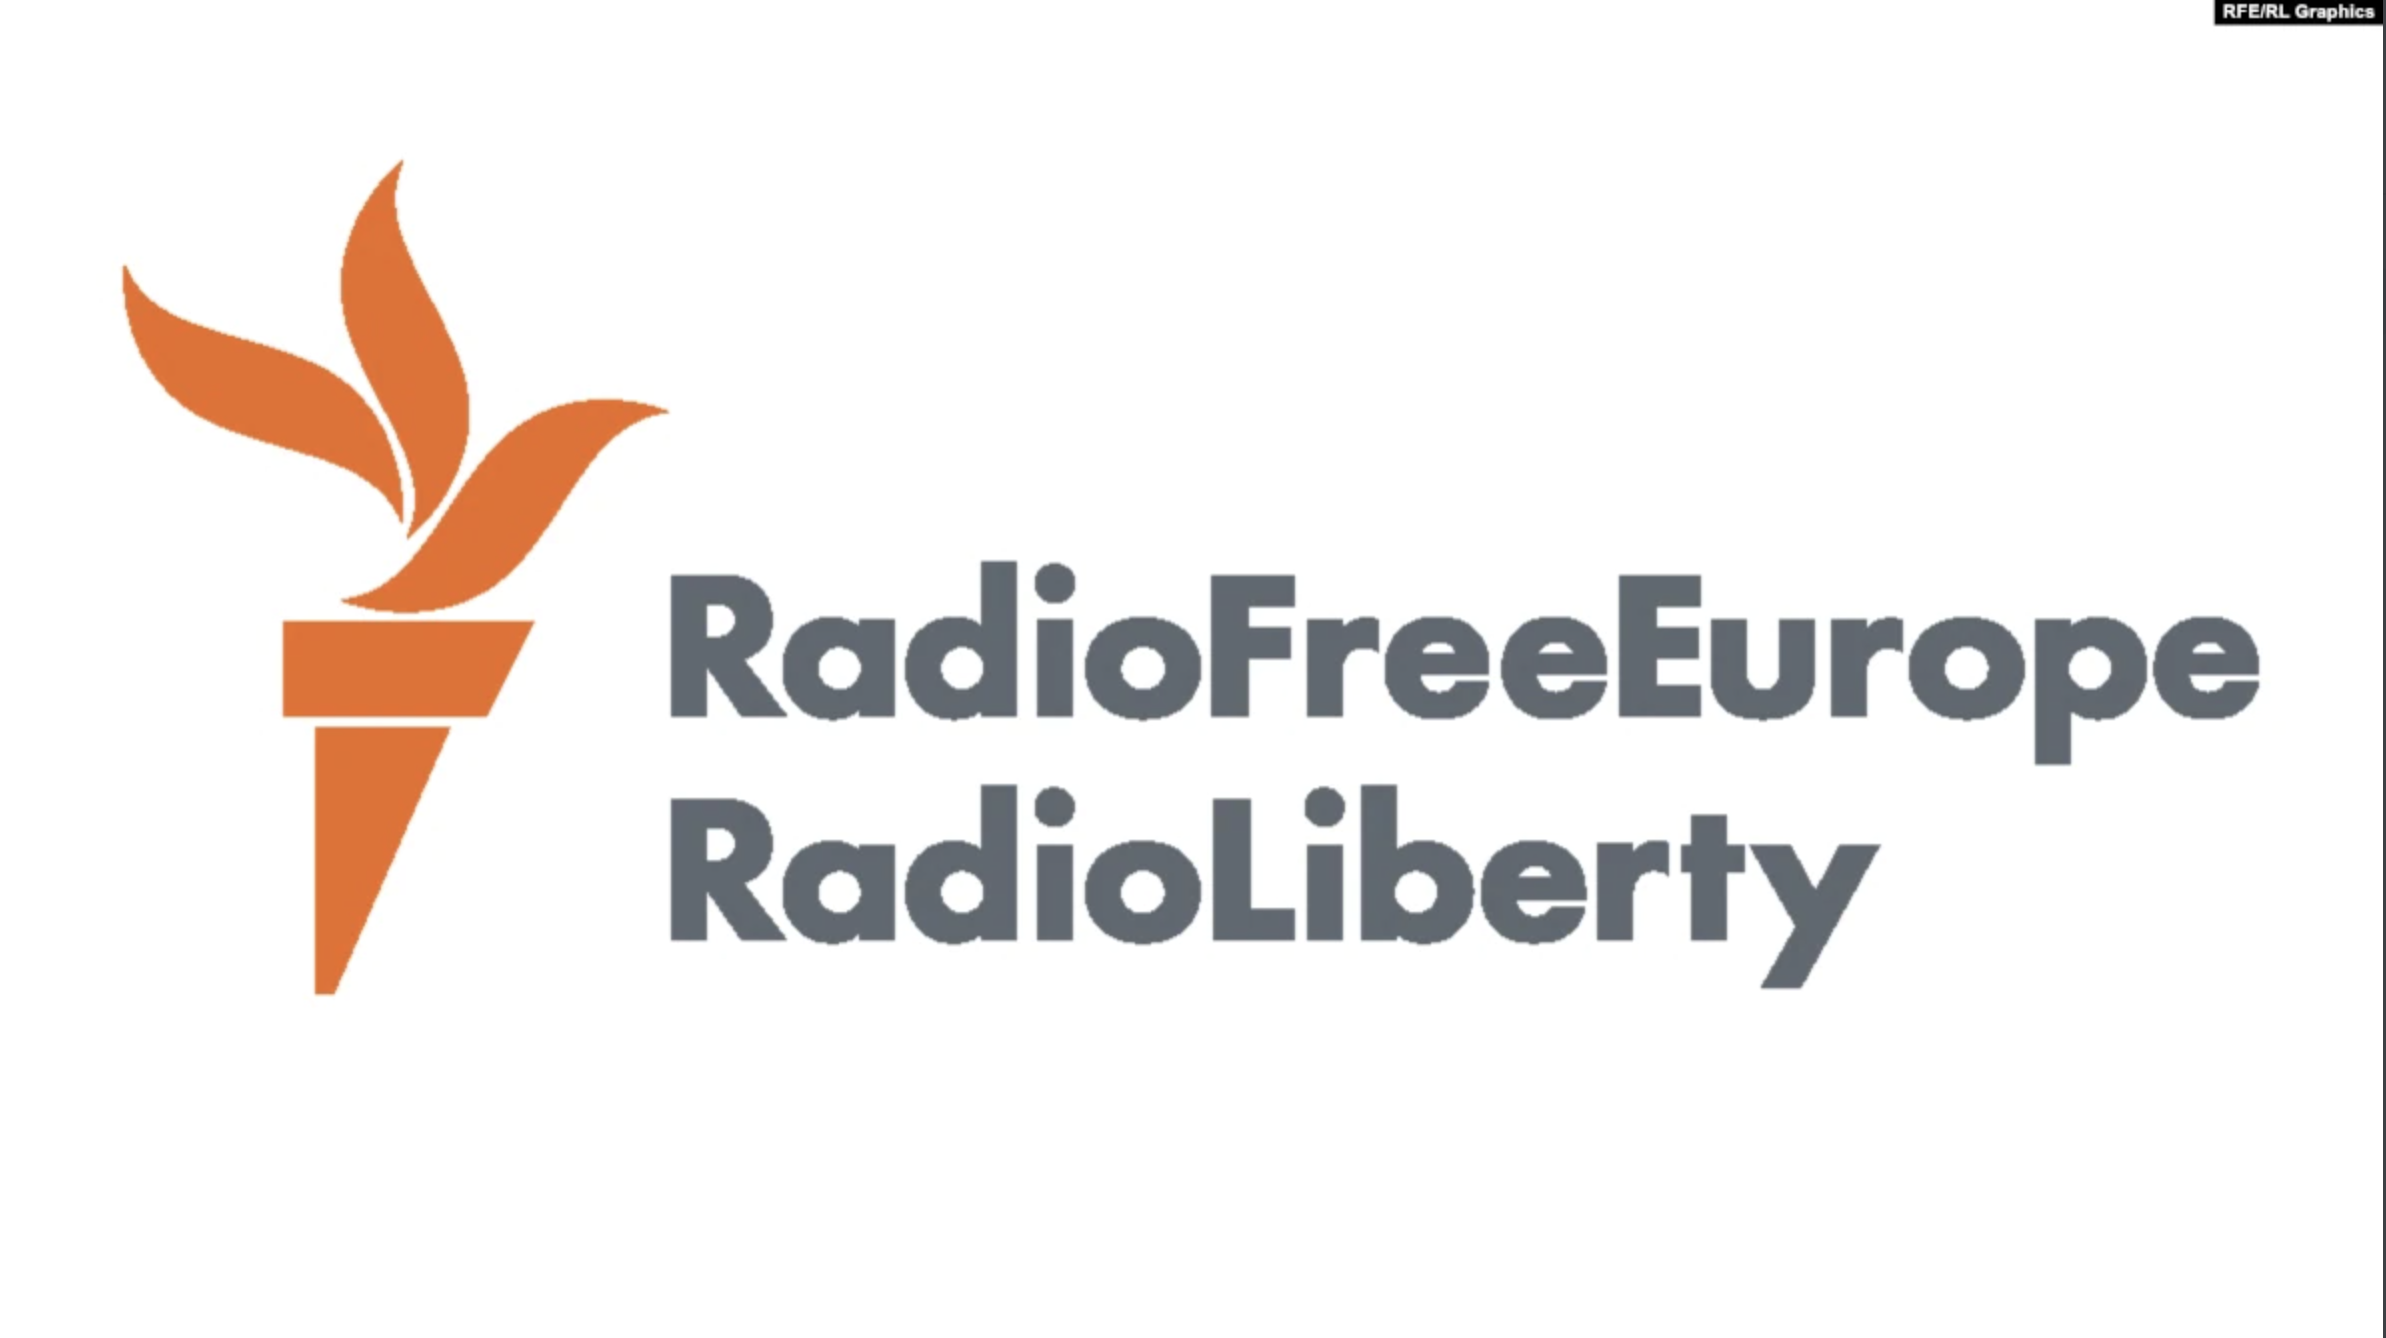 As war transforms media landscape in Europe, RFE/RL opens offices in Latvia, Lithuania